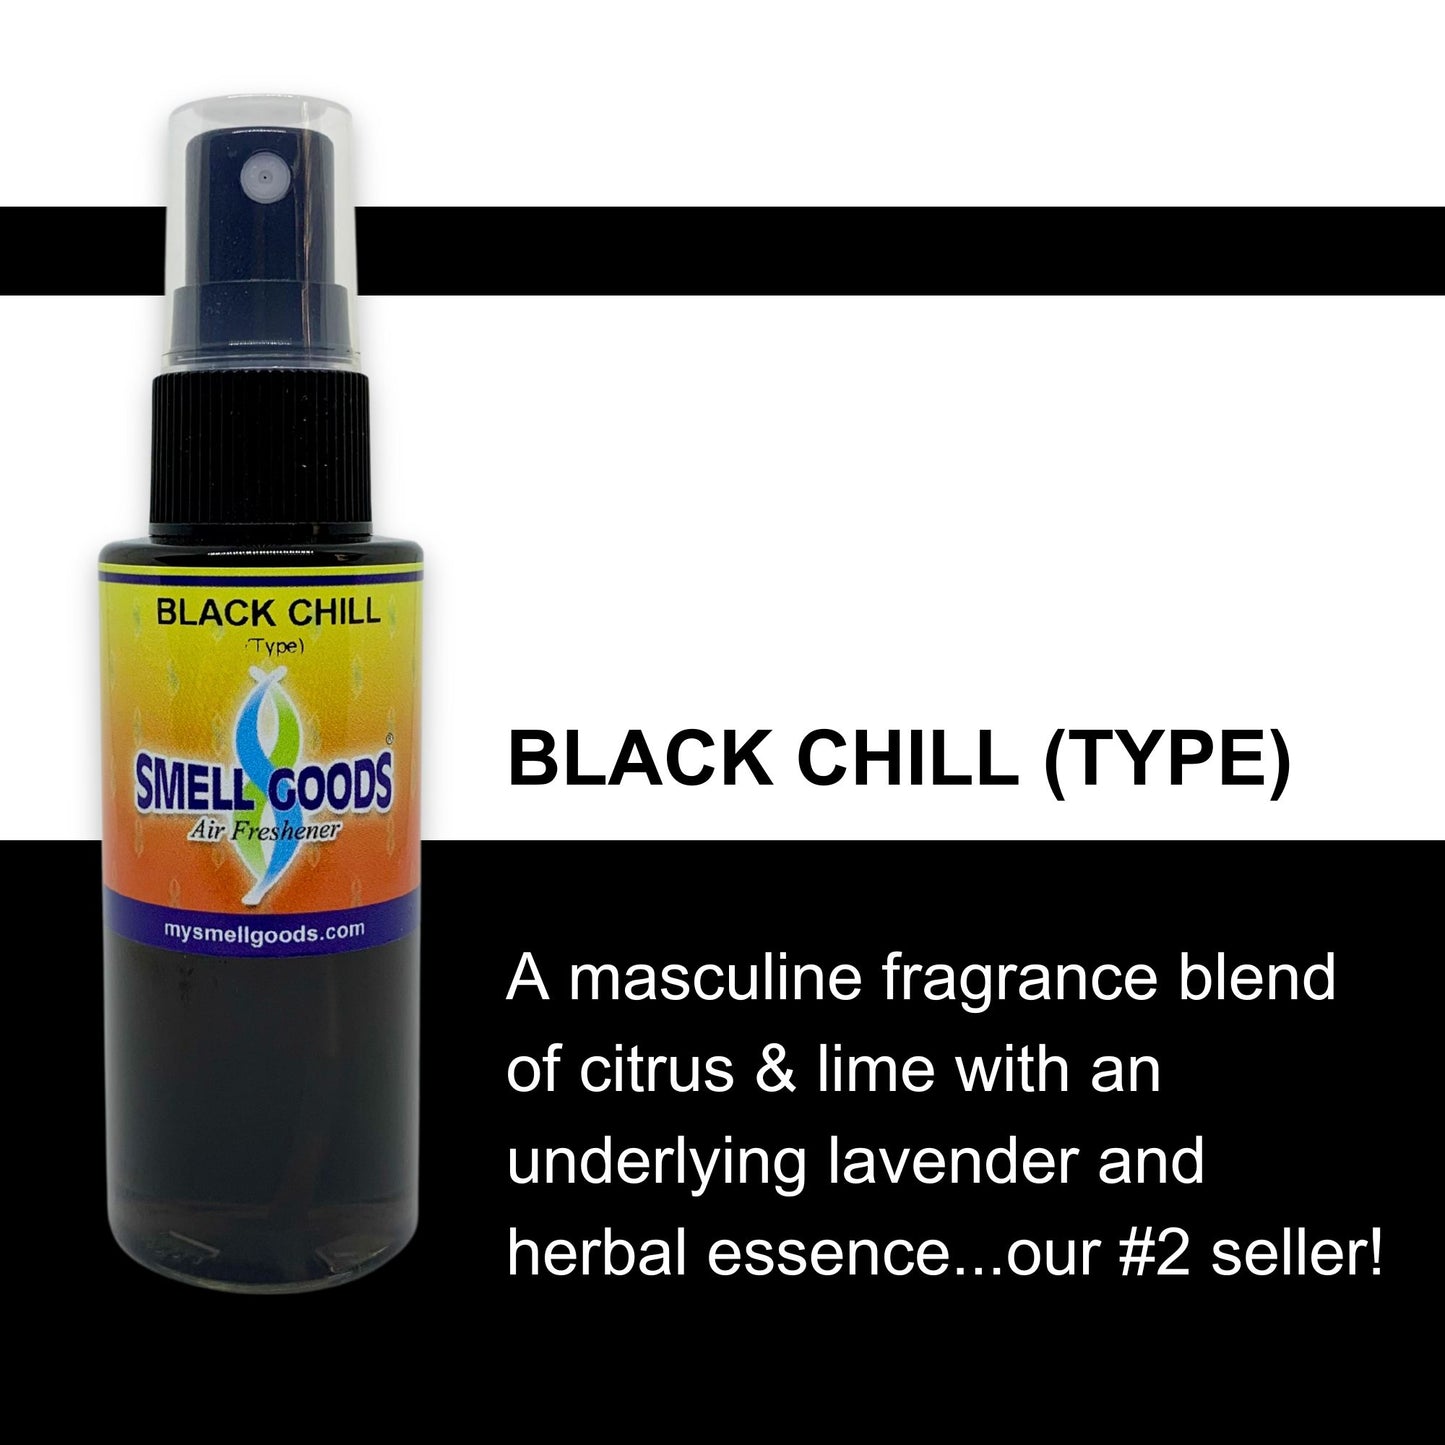 Black Chill (Type) Air Freshener by Smell Goods